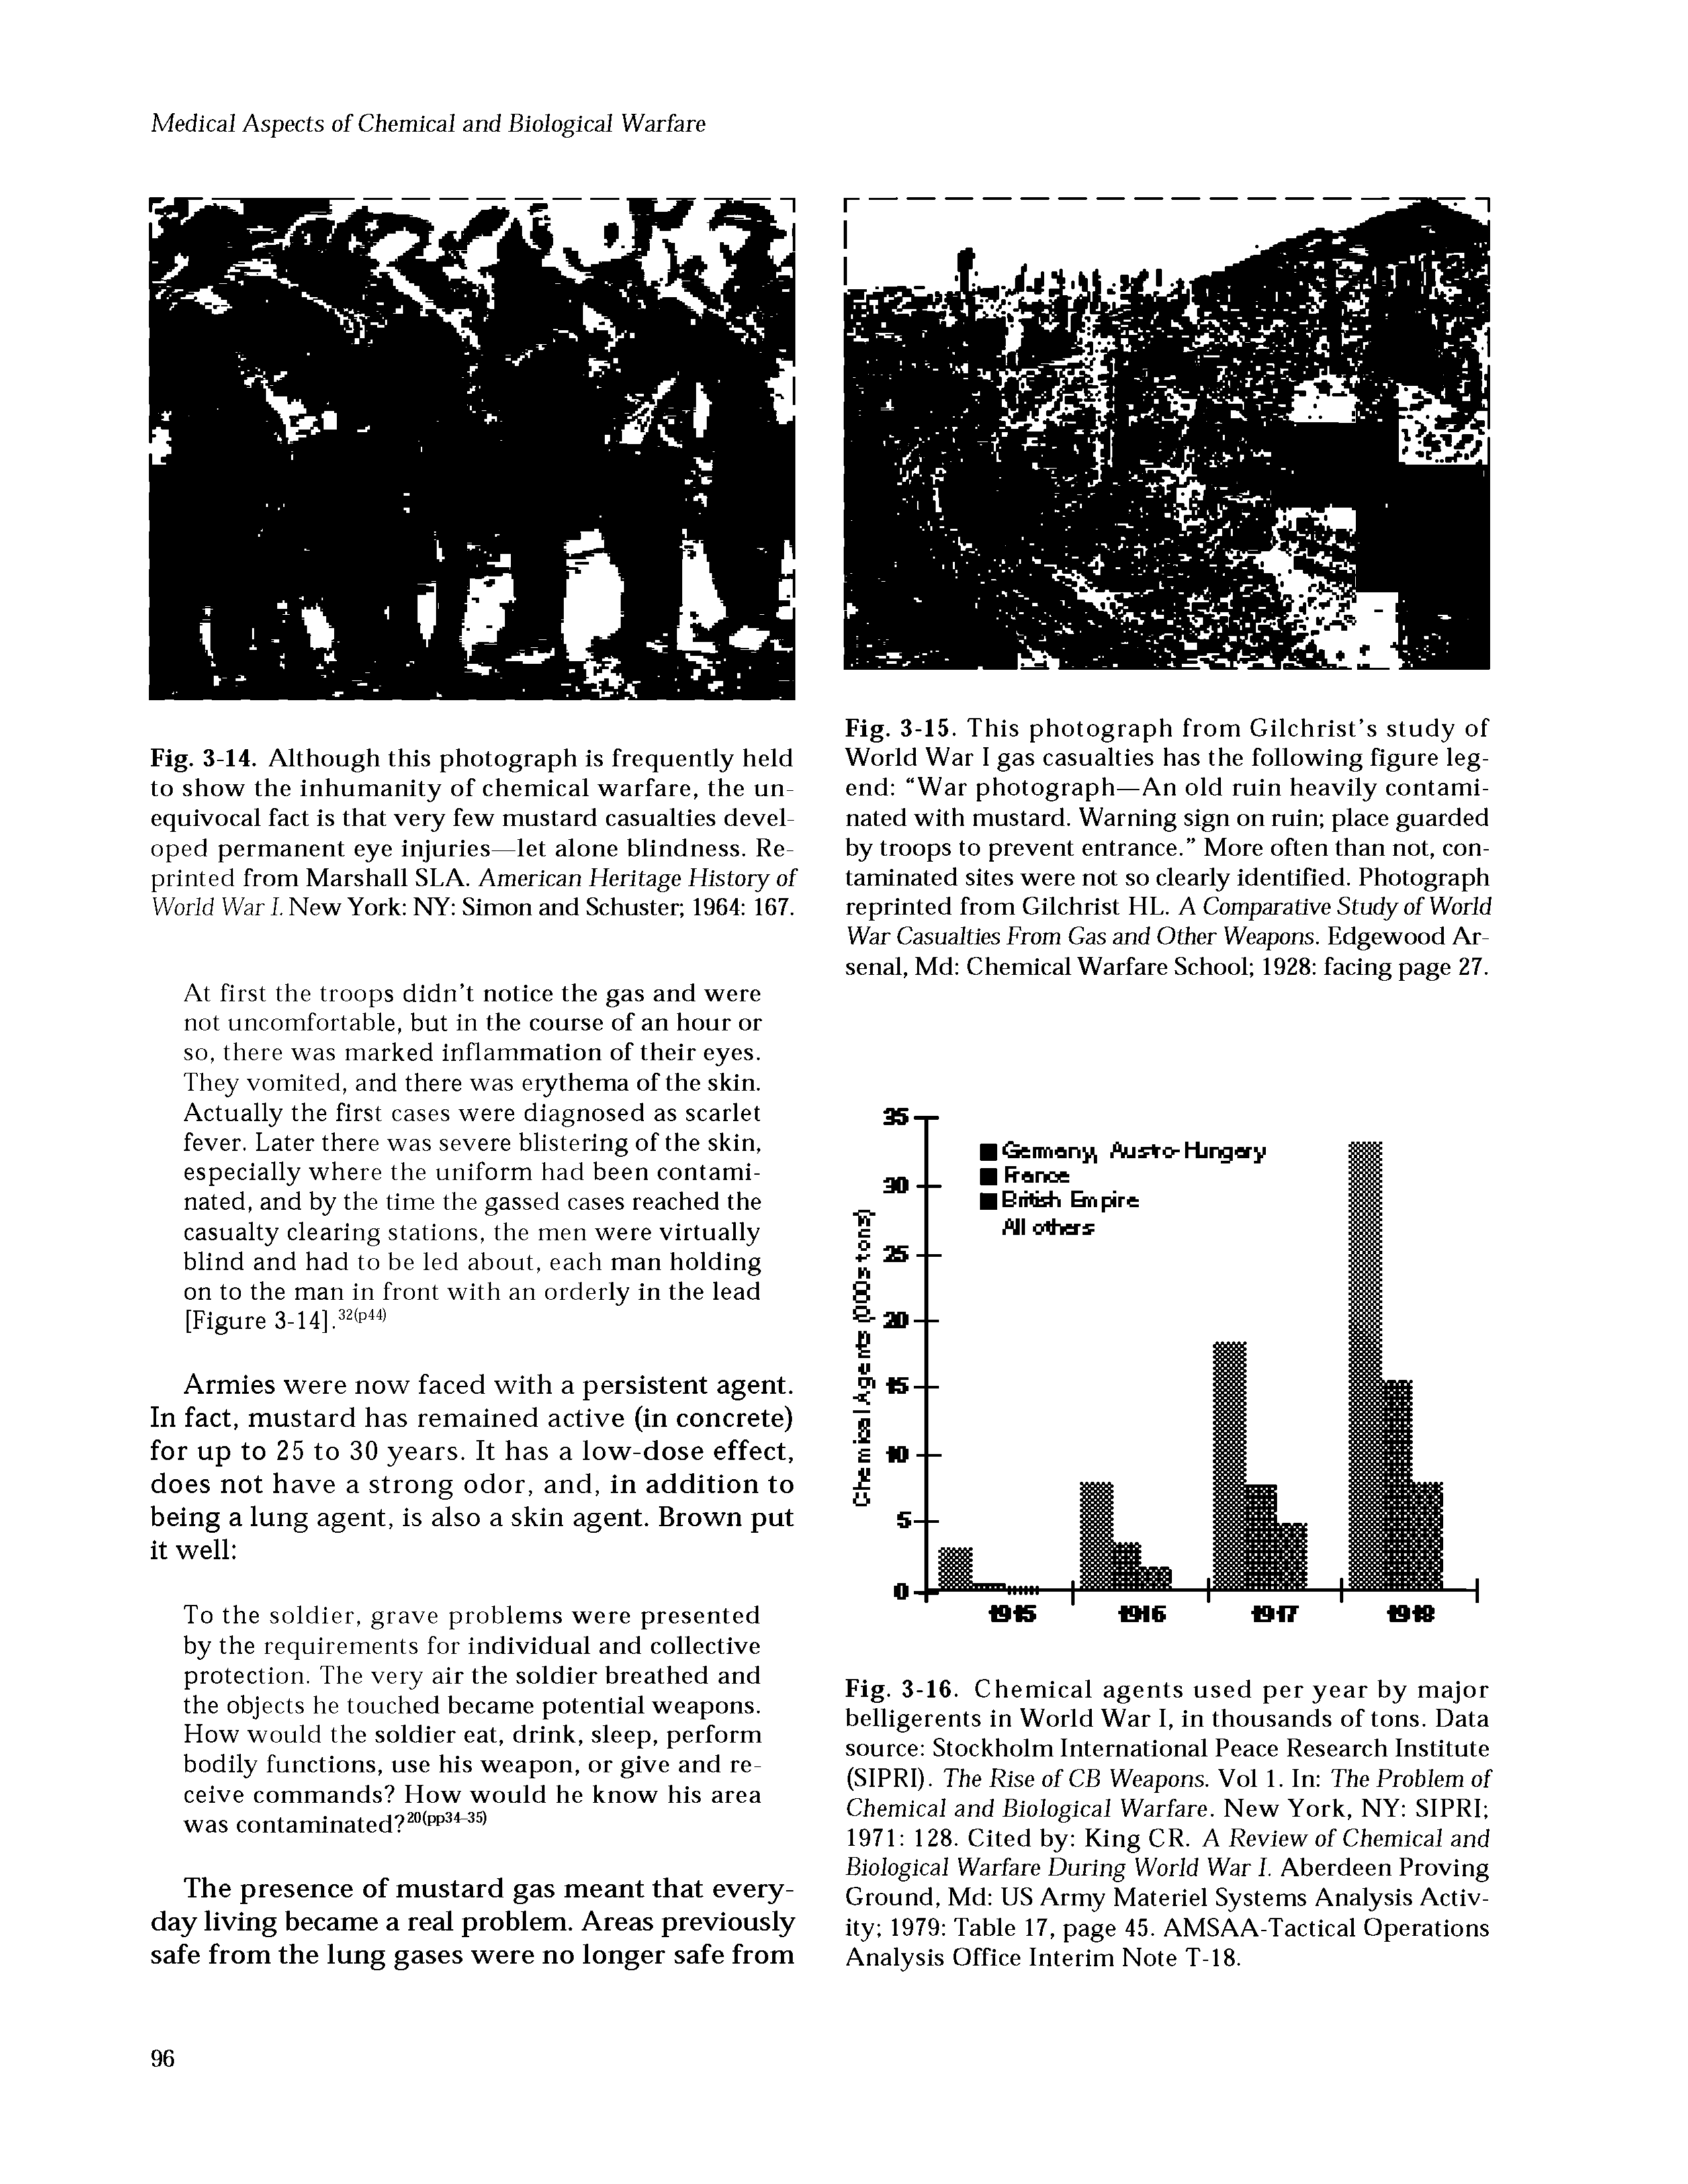 Fig. 3-16. Chemical agents used per year by major belligerents in World War I, in thousands of tons. Data source Stockholm International Peace Research Institute (SIPRI). The Rise of CB Weapons. Vol 1. In The Problem of Chemical and Biological Warfare. New York, NY SIPRI 1971 128. Cited by King CR. A Review of Chemical and Biological Warfare During World War I. Aberdeen Proving Ground, Md US Army Materiel Systems Analysis Activity 1979 Table 17, page 45. AMSAA-Tactical Operations Analysis Office Interim Note T-18.